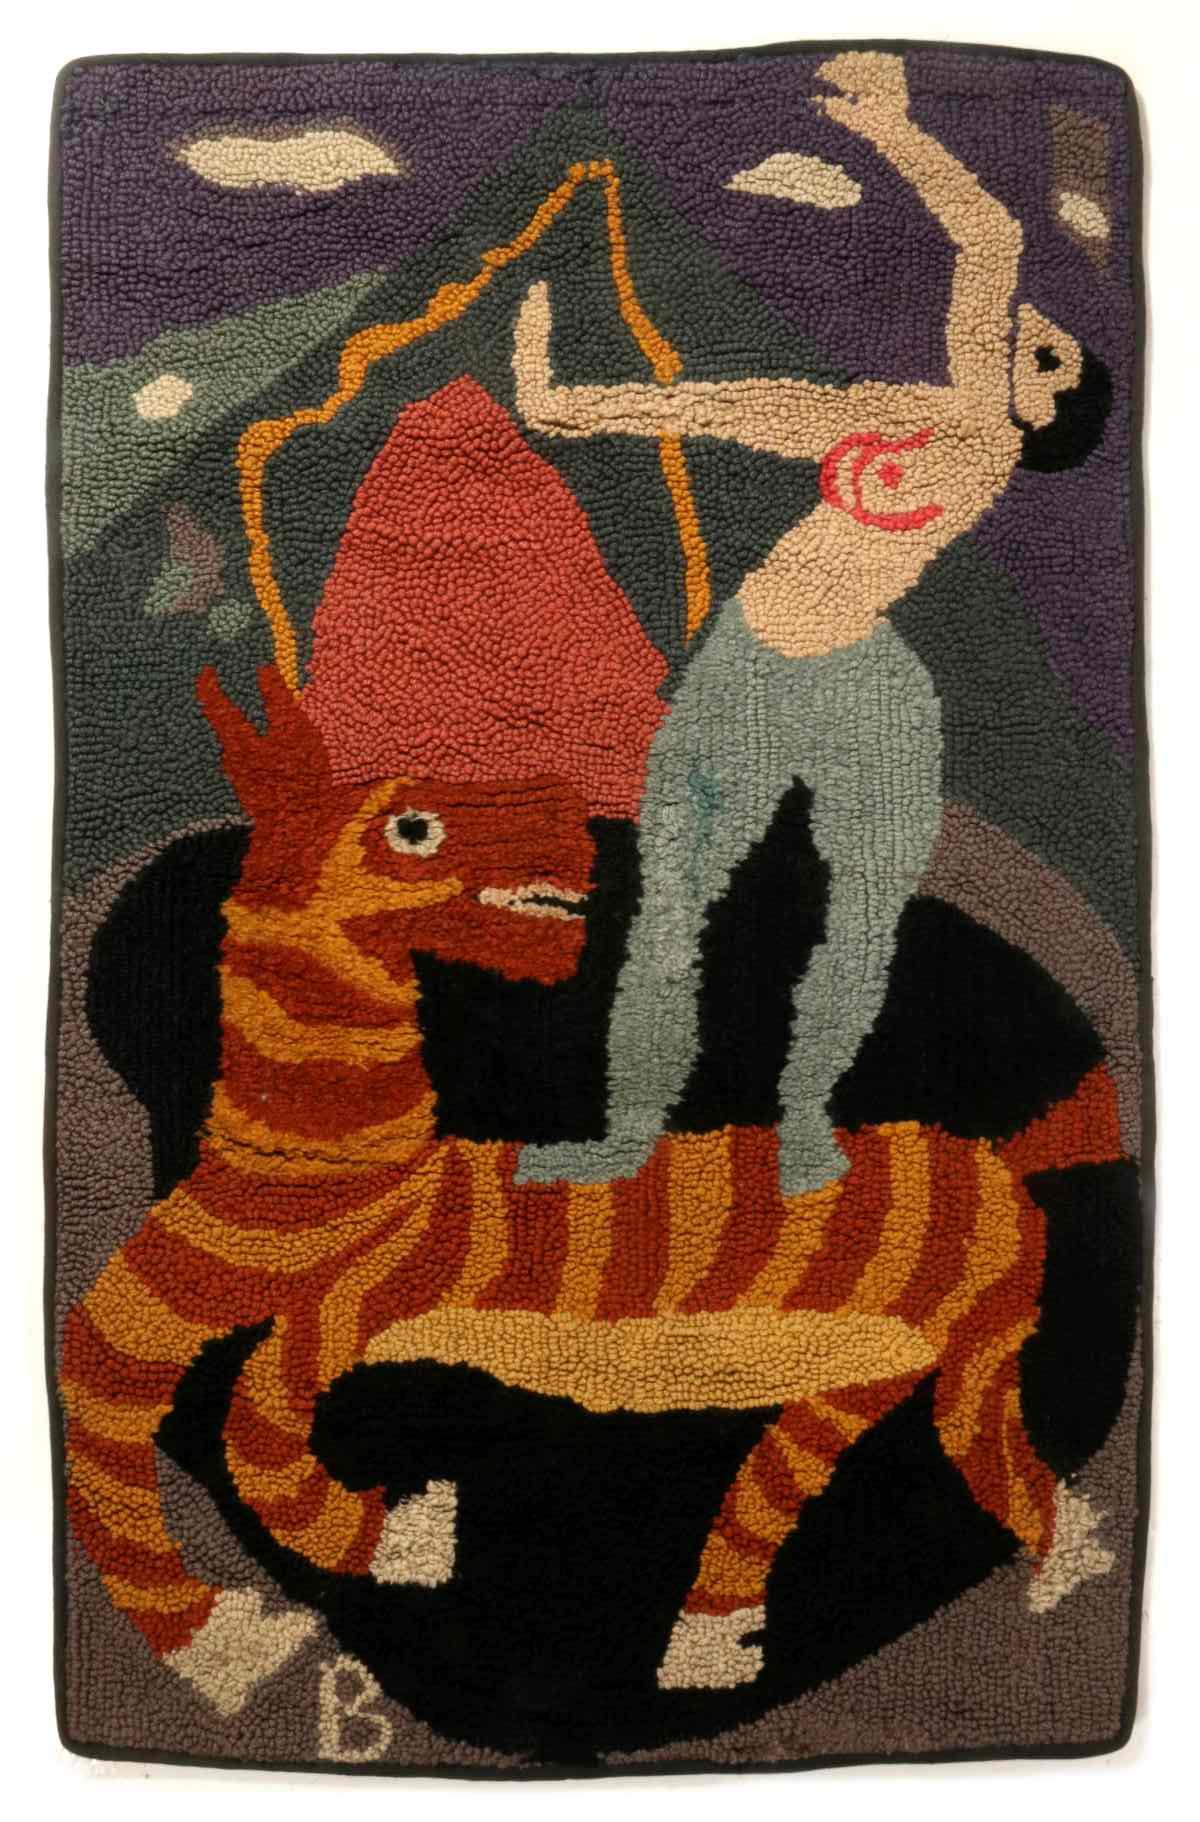 AARON BOHROD (1907-1992) AND RUTH BOHROD TAPESTRY